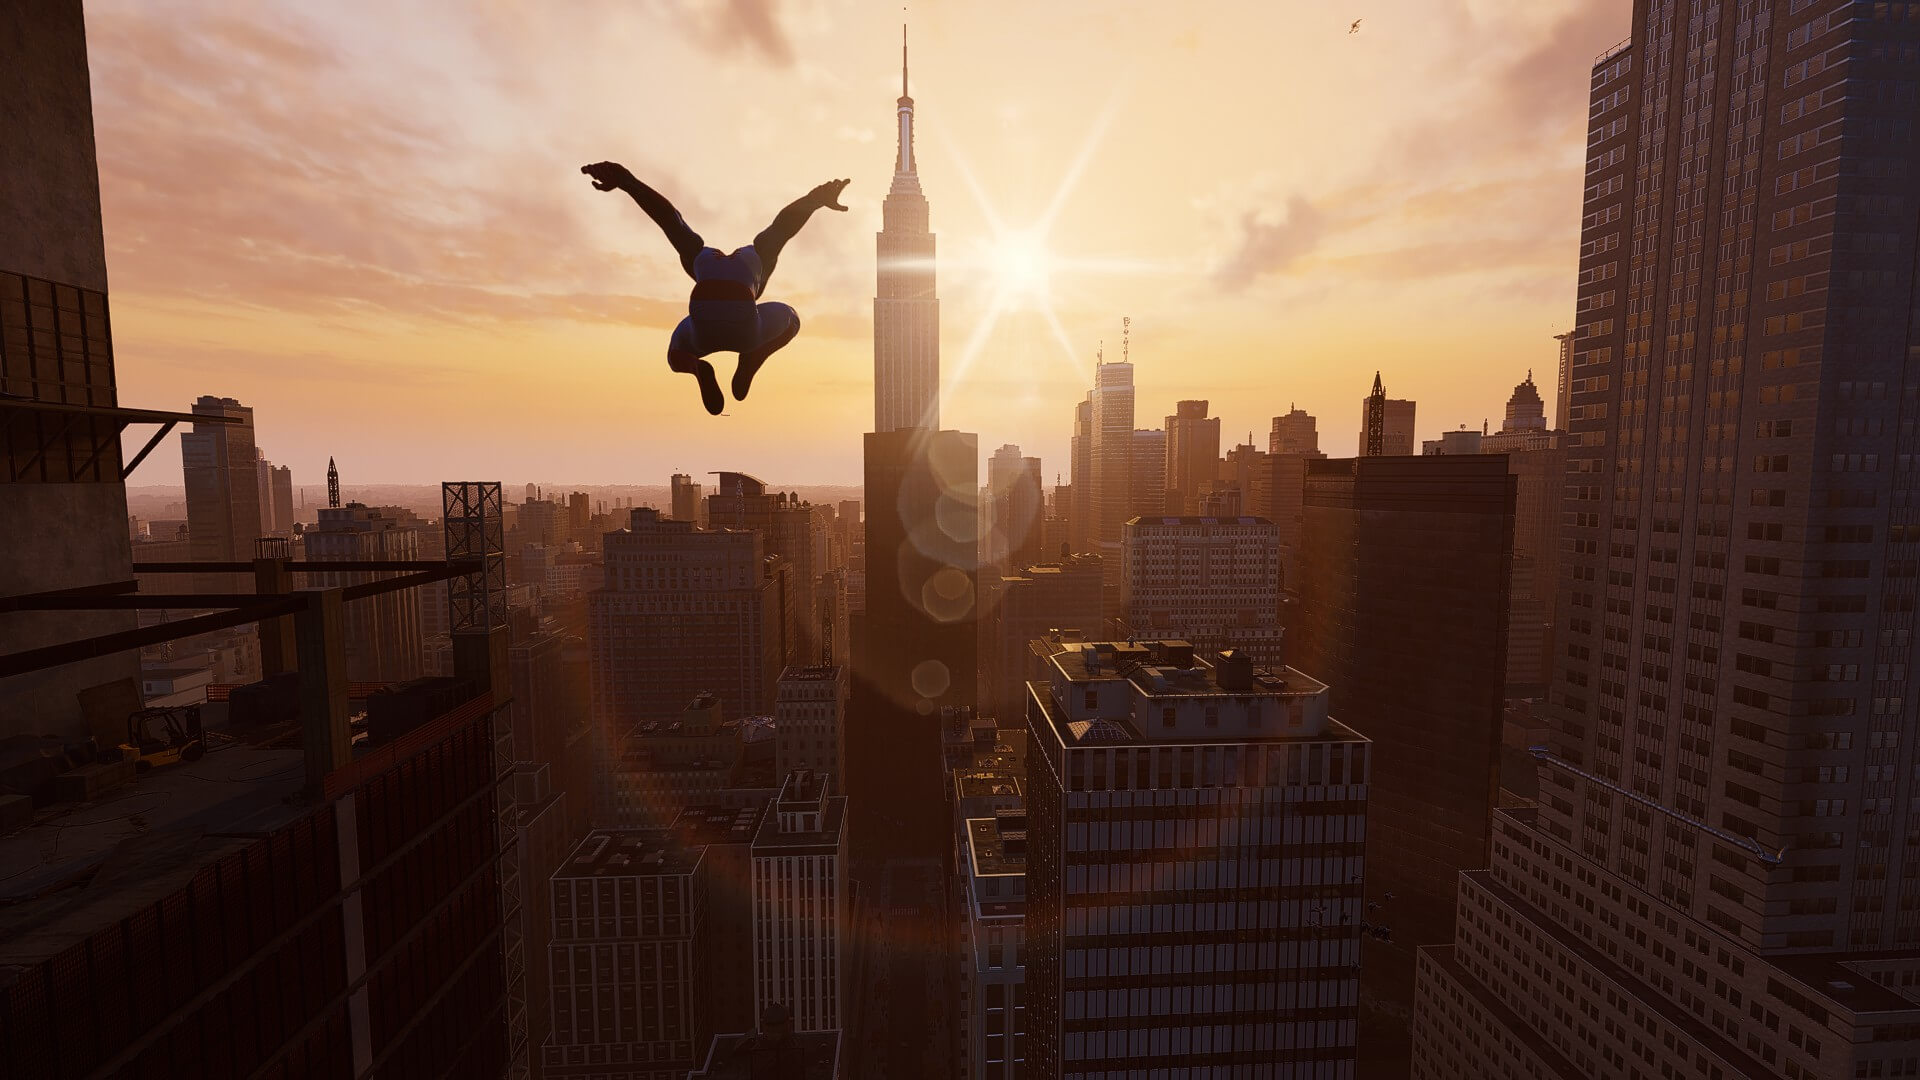 Marvel's Spider-Man Remastered PC Review